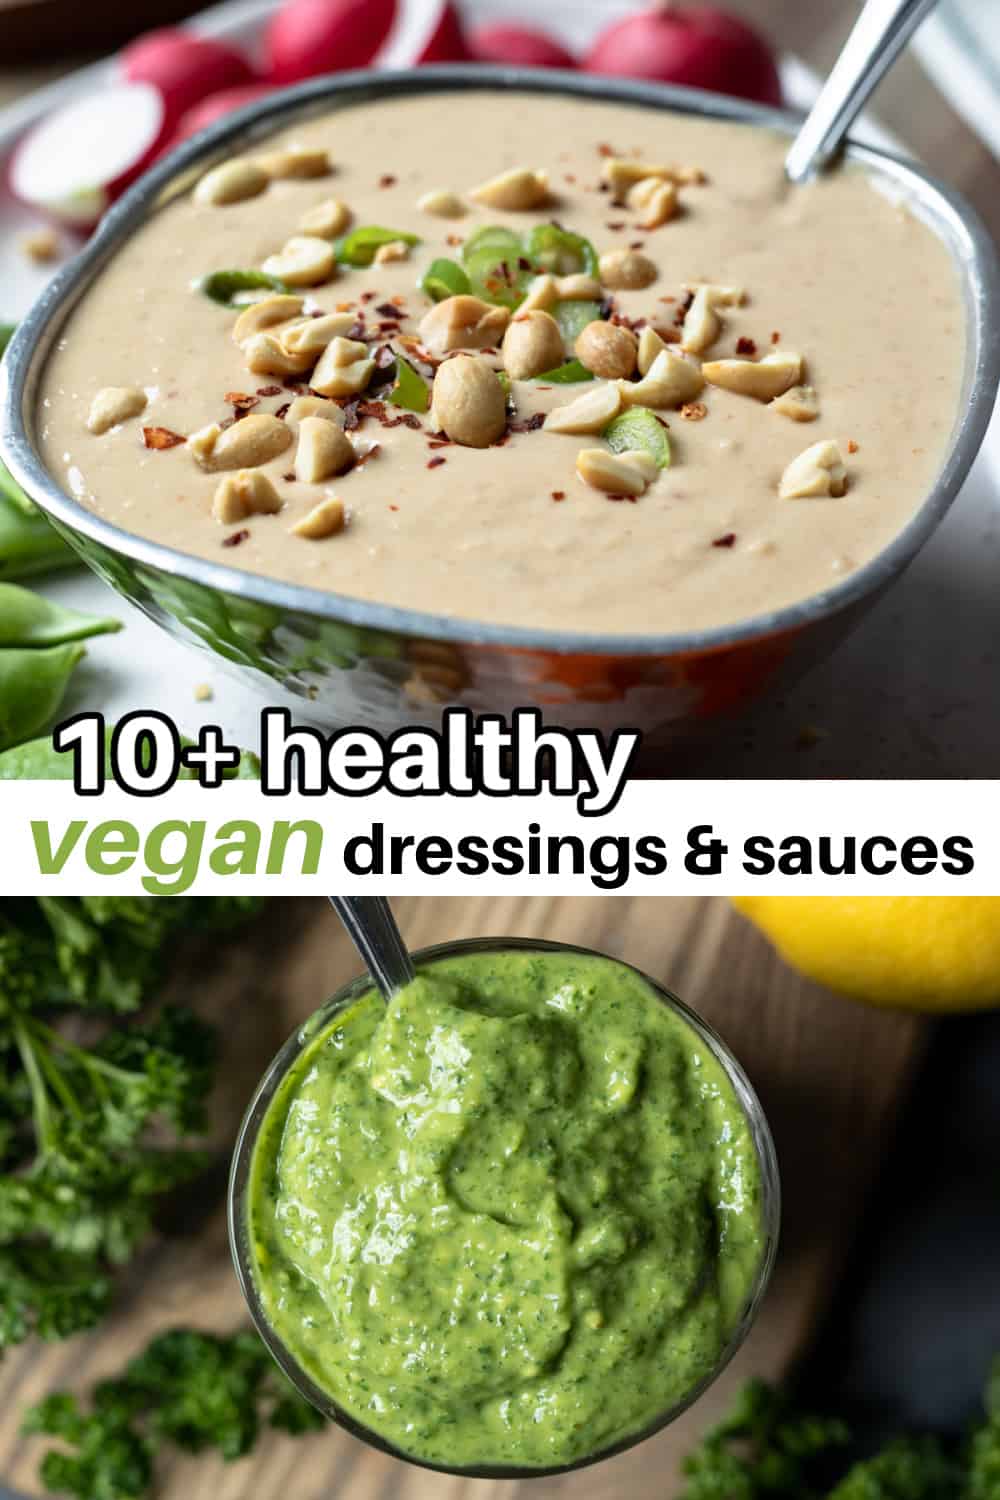 image to save on Pinterest with two photos of salad dressing and text overlay.